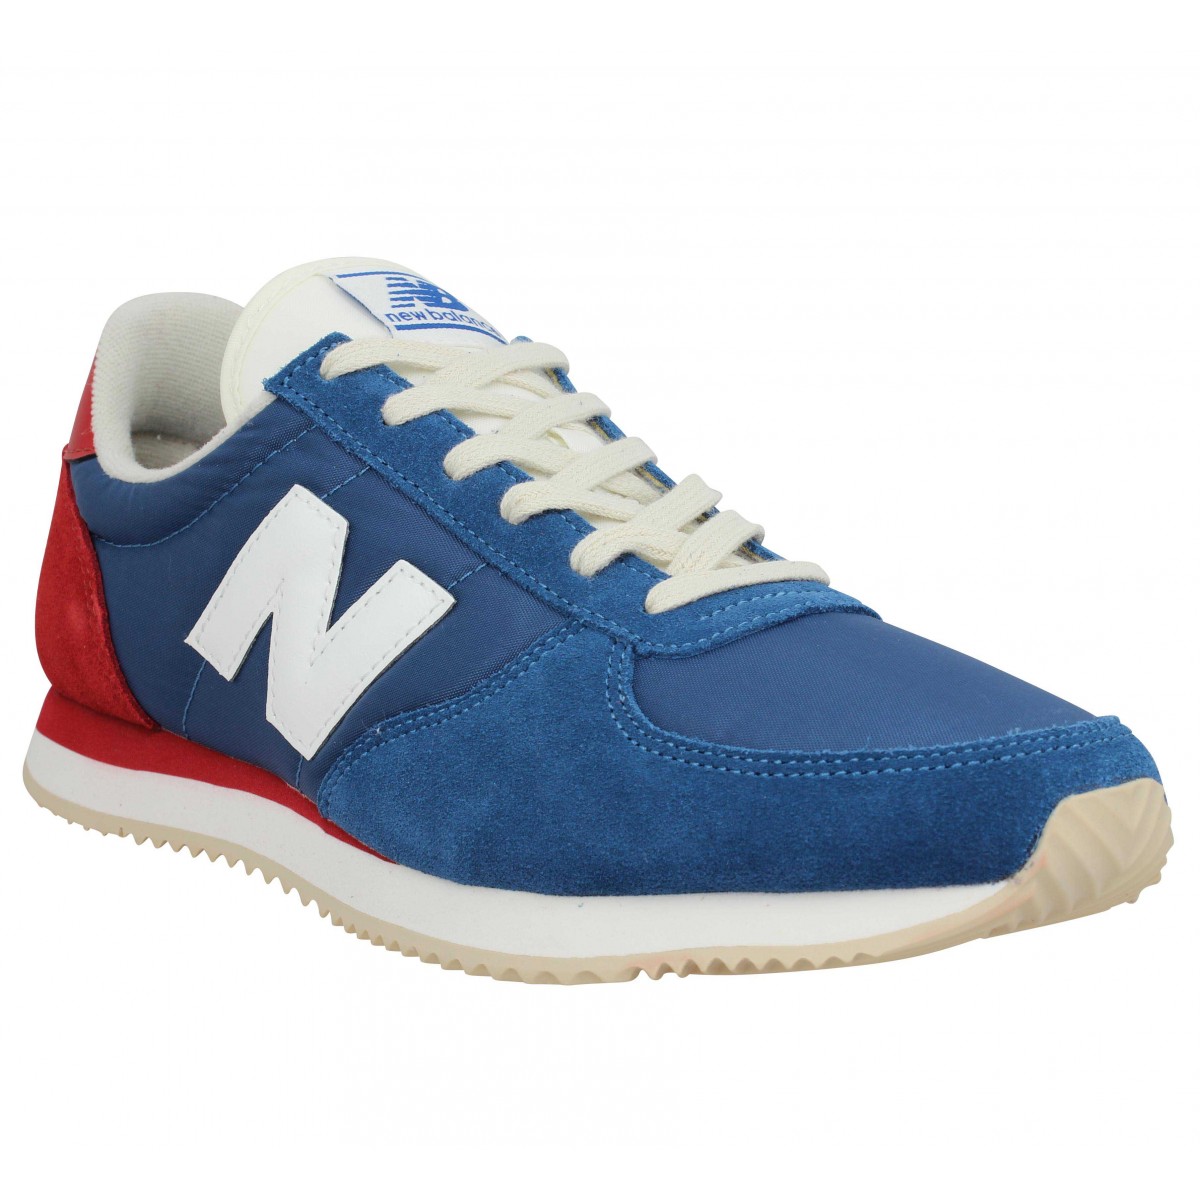 Chaussures New balance 220 toile homme bleu homme | Fanny chaussures